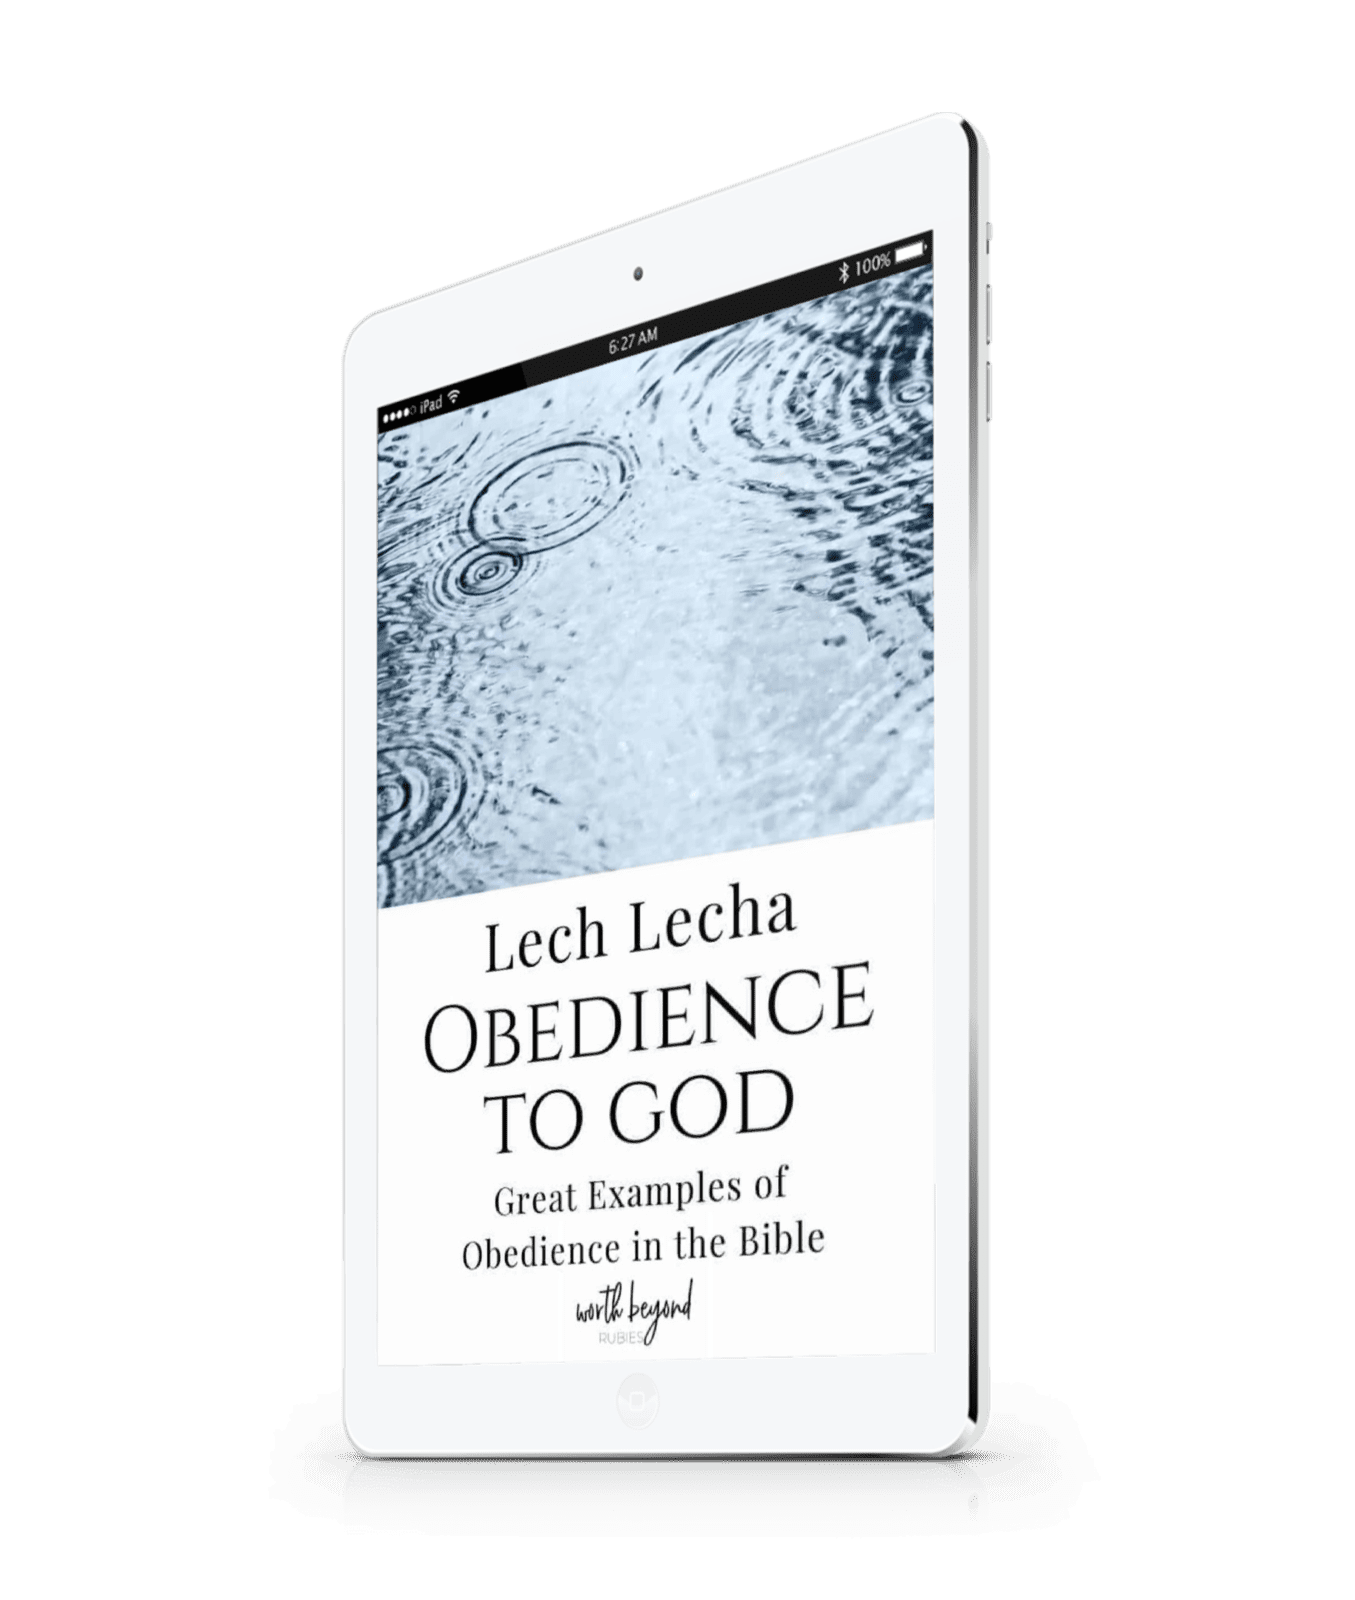 a tablet opened to the ebook Obedience to God and text that says Lech Lecha - Obedience to God - Great Examples of Obedience in the Bible Ebook